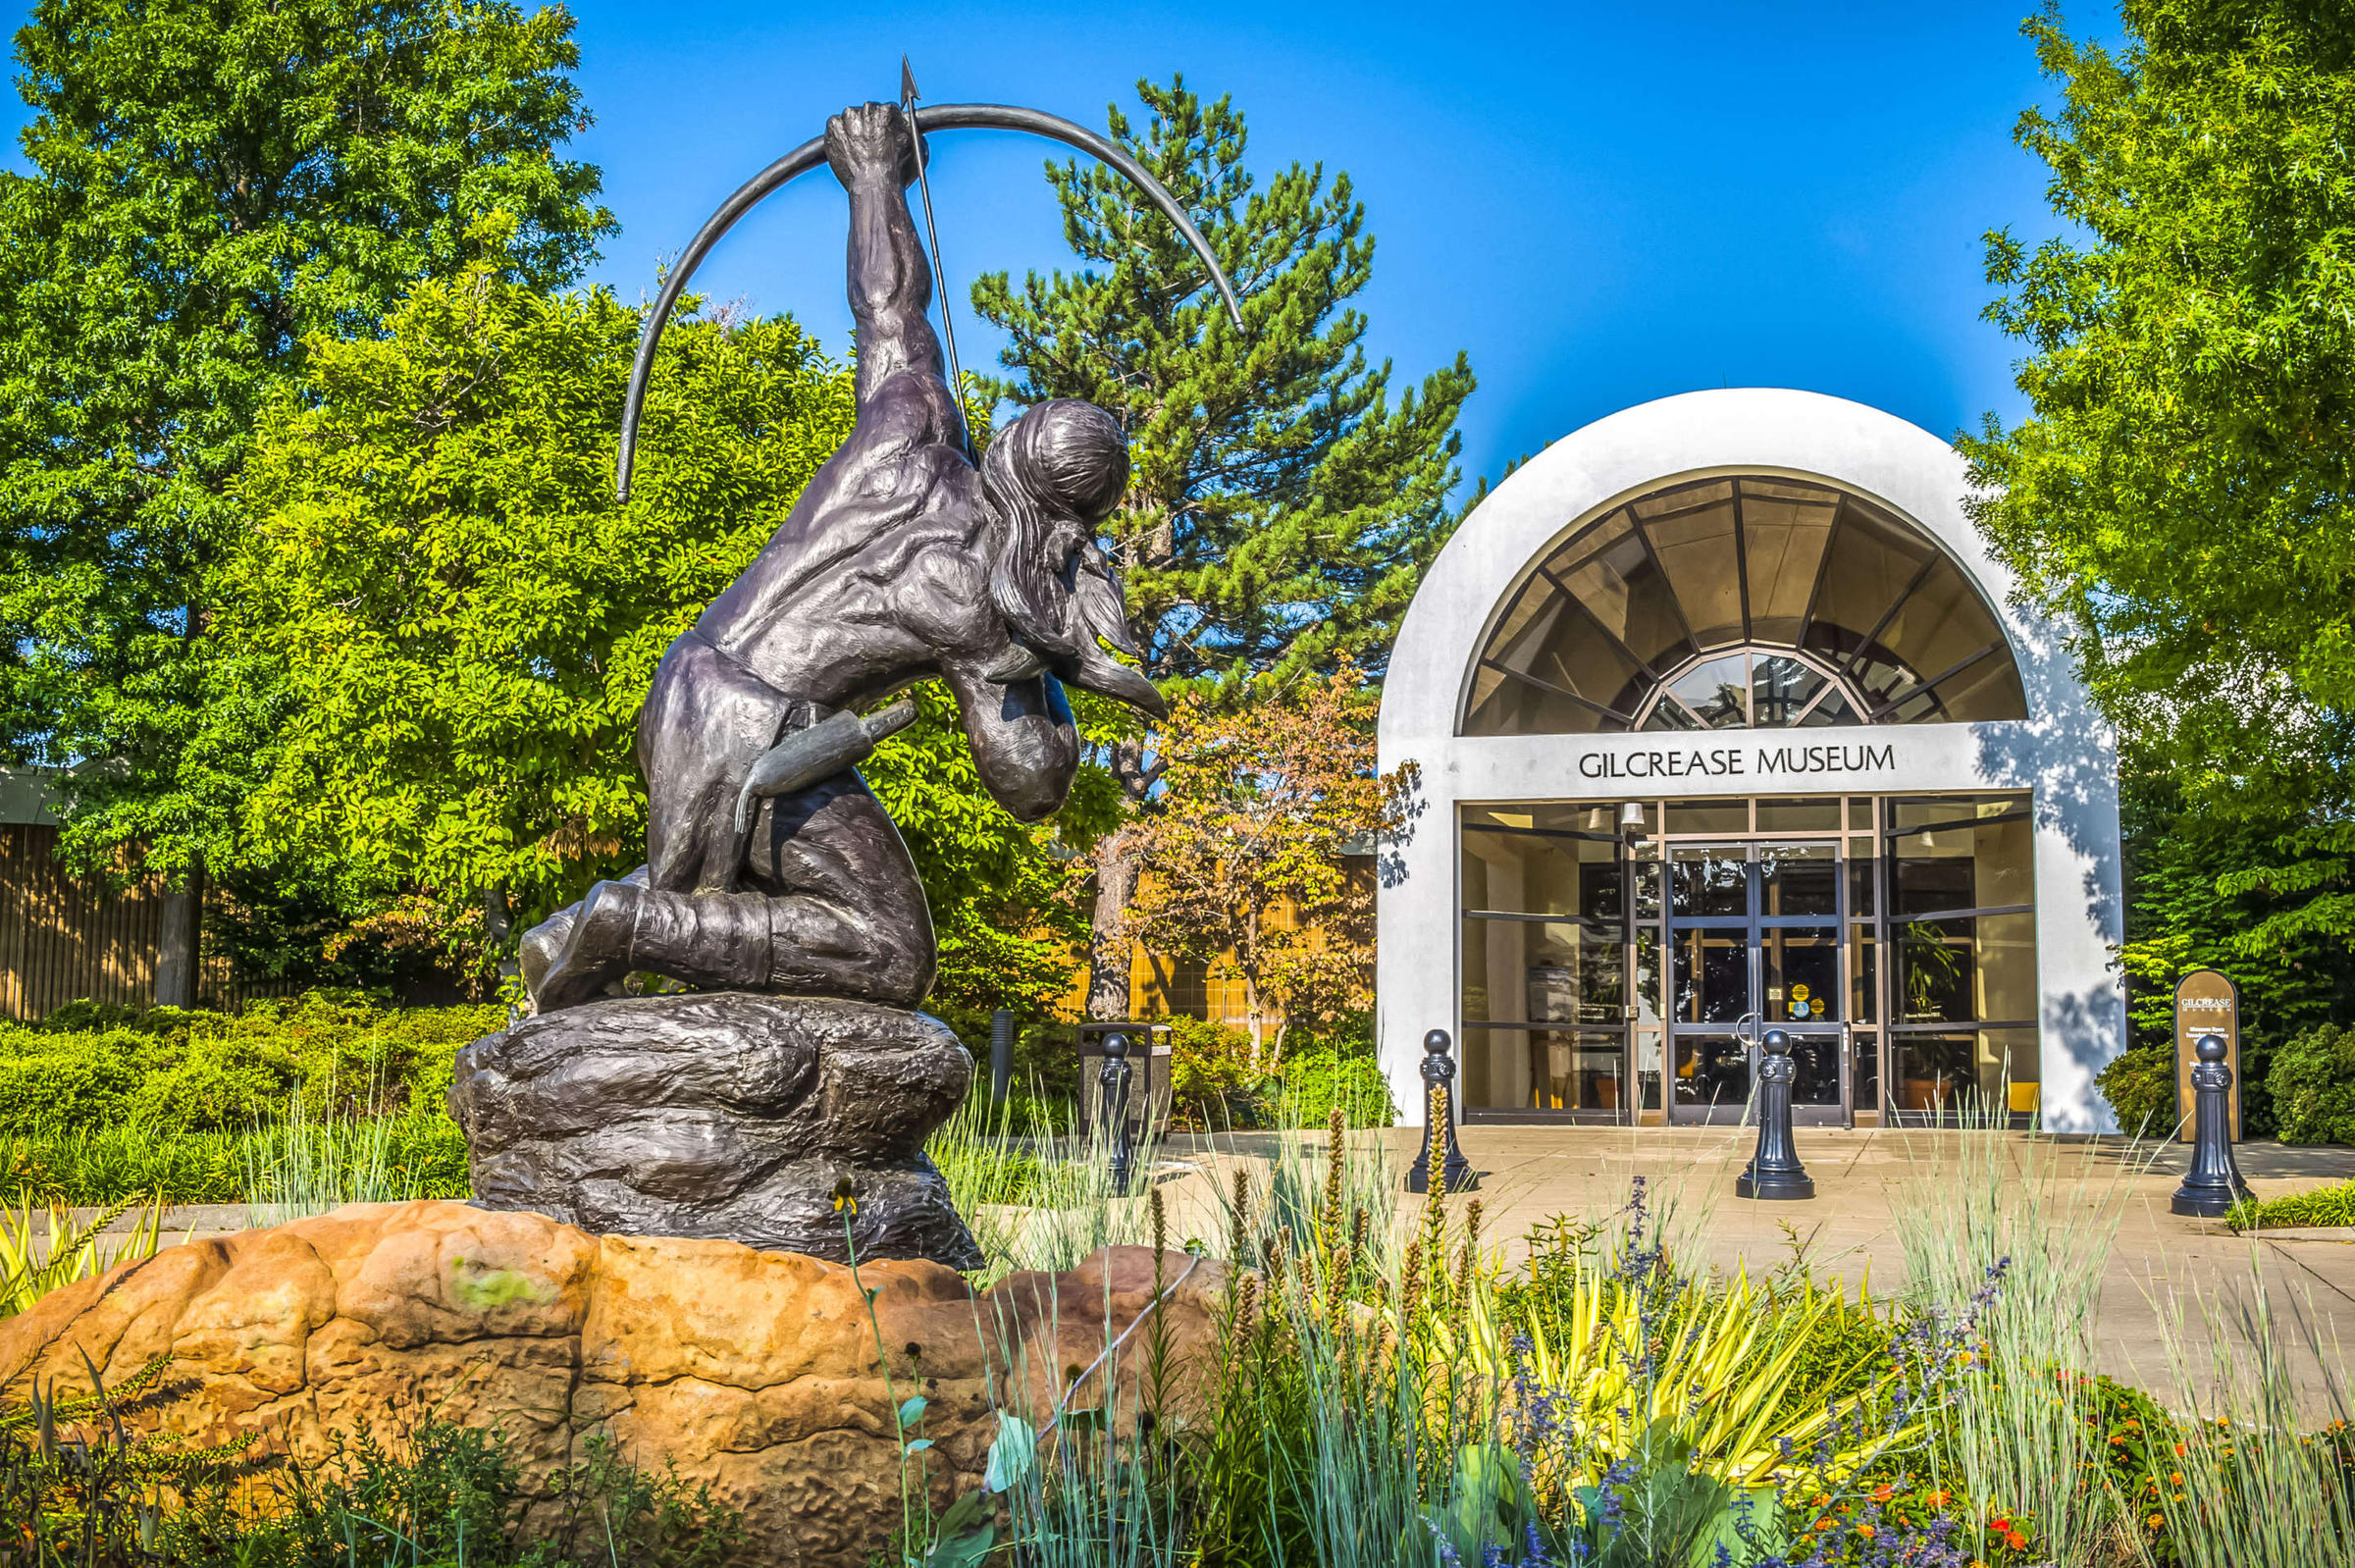 -The Gilcrease Museum